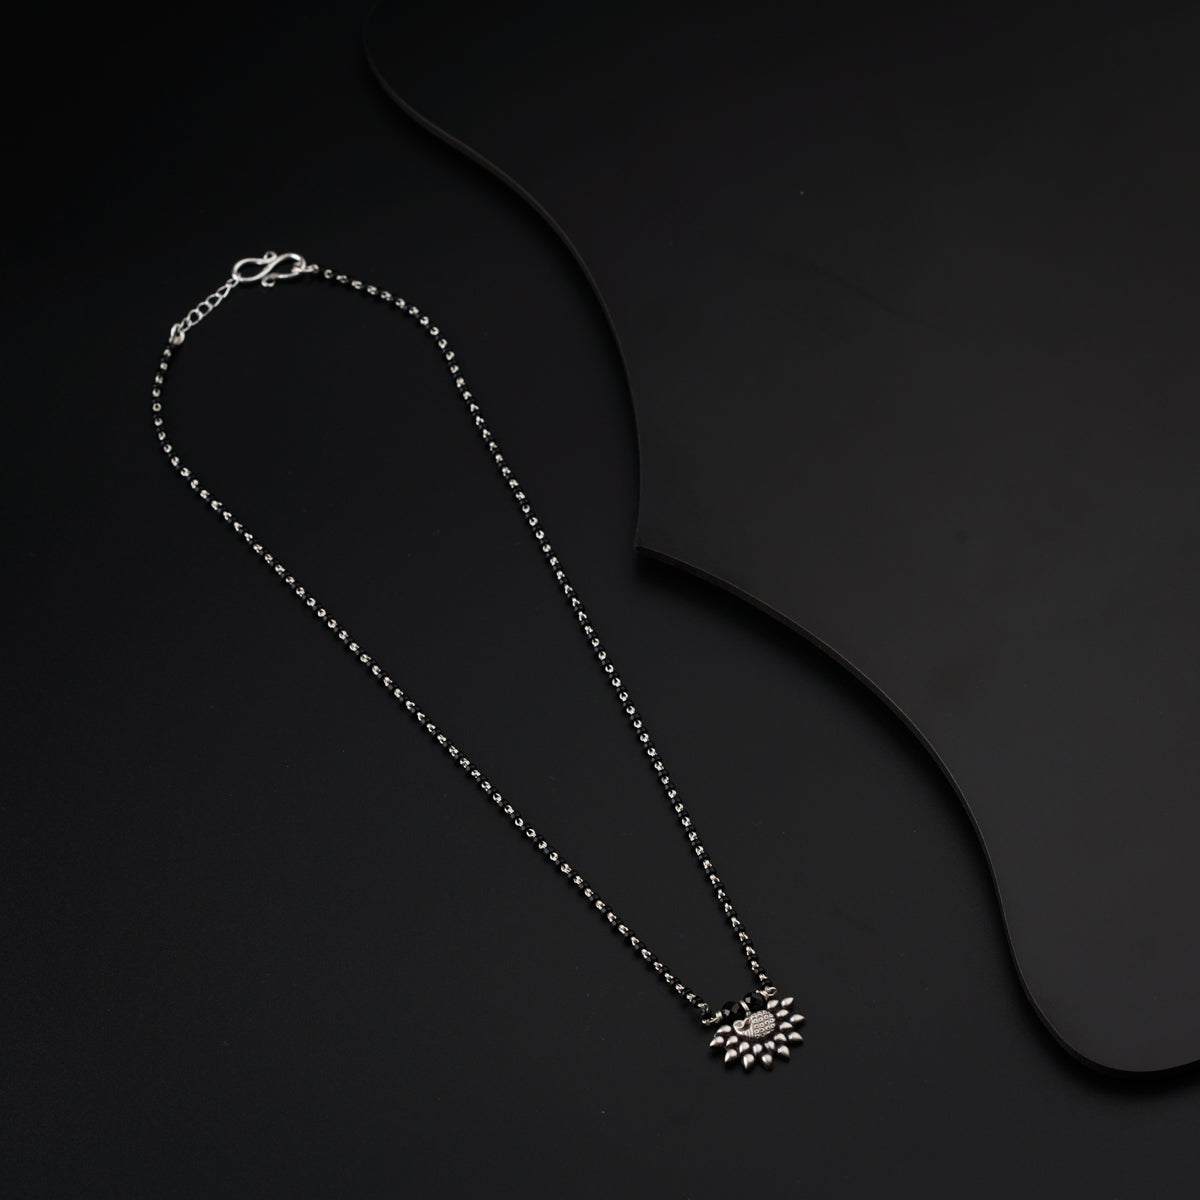 a necklace on a black surface with a chain